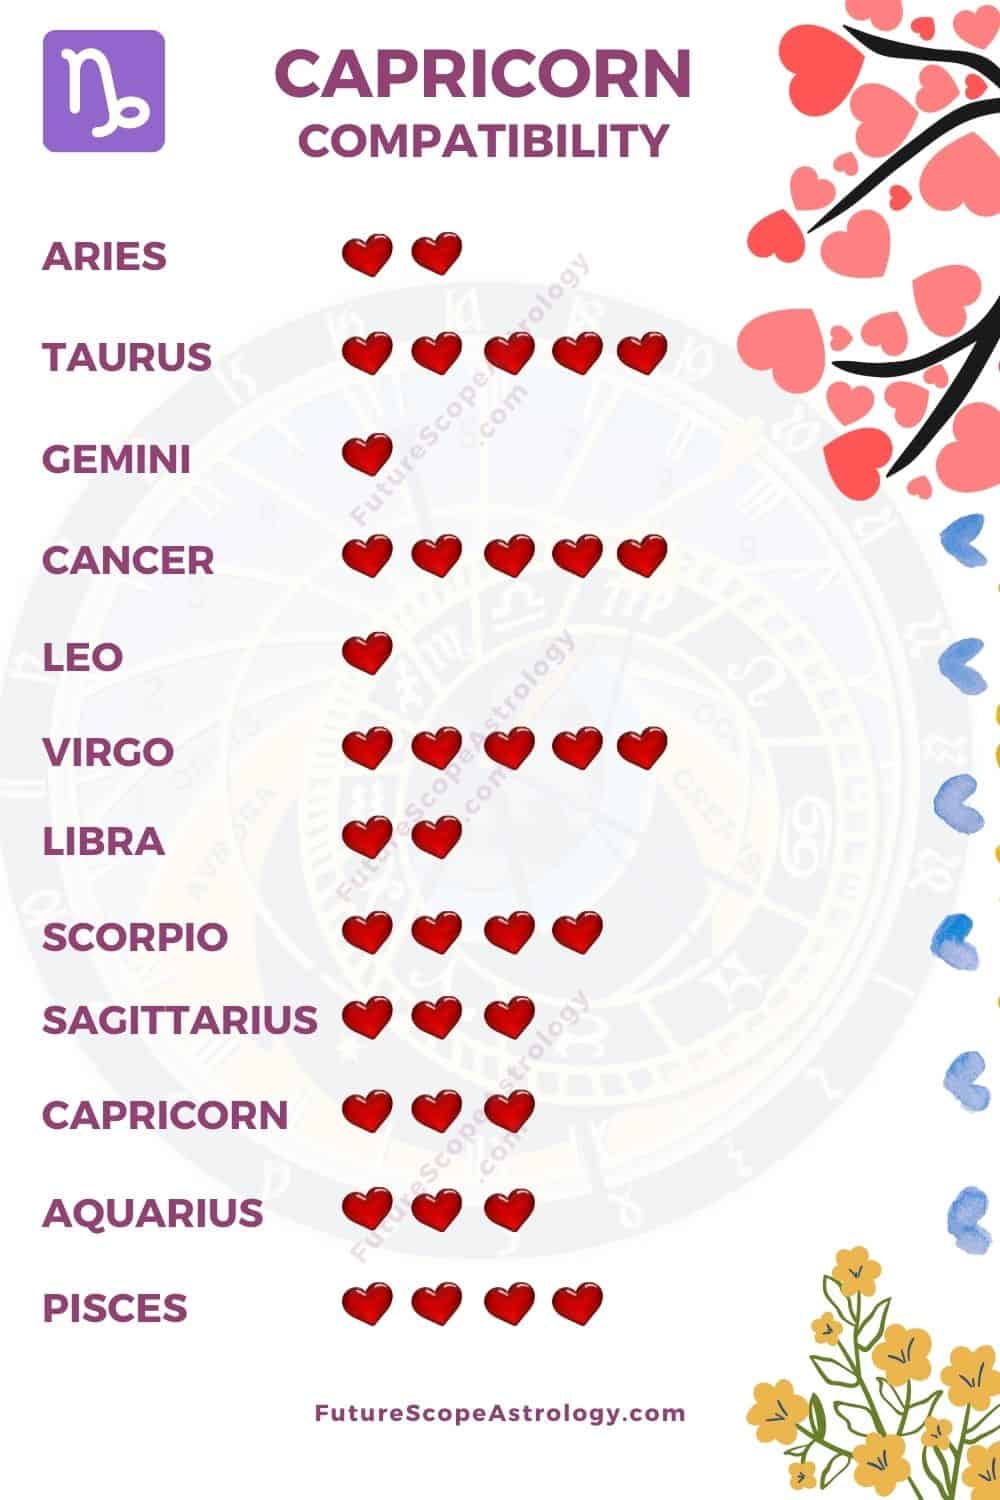 What is capricorn most compatible with